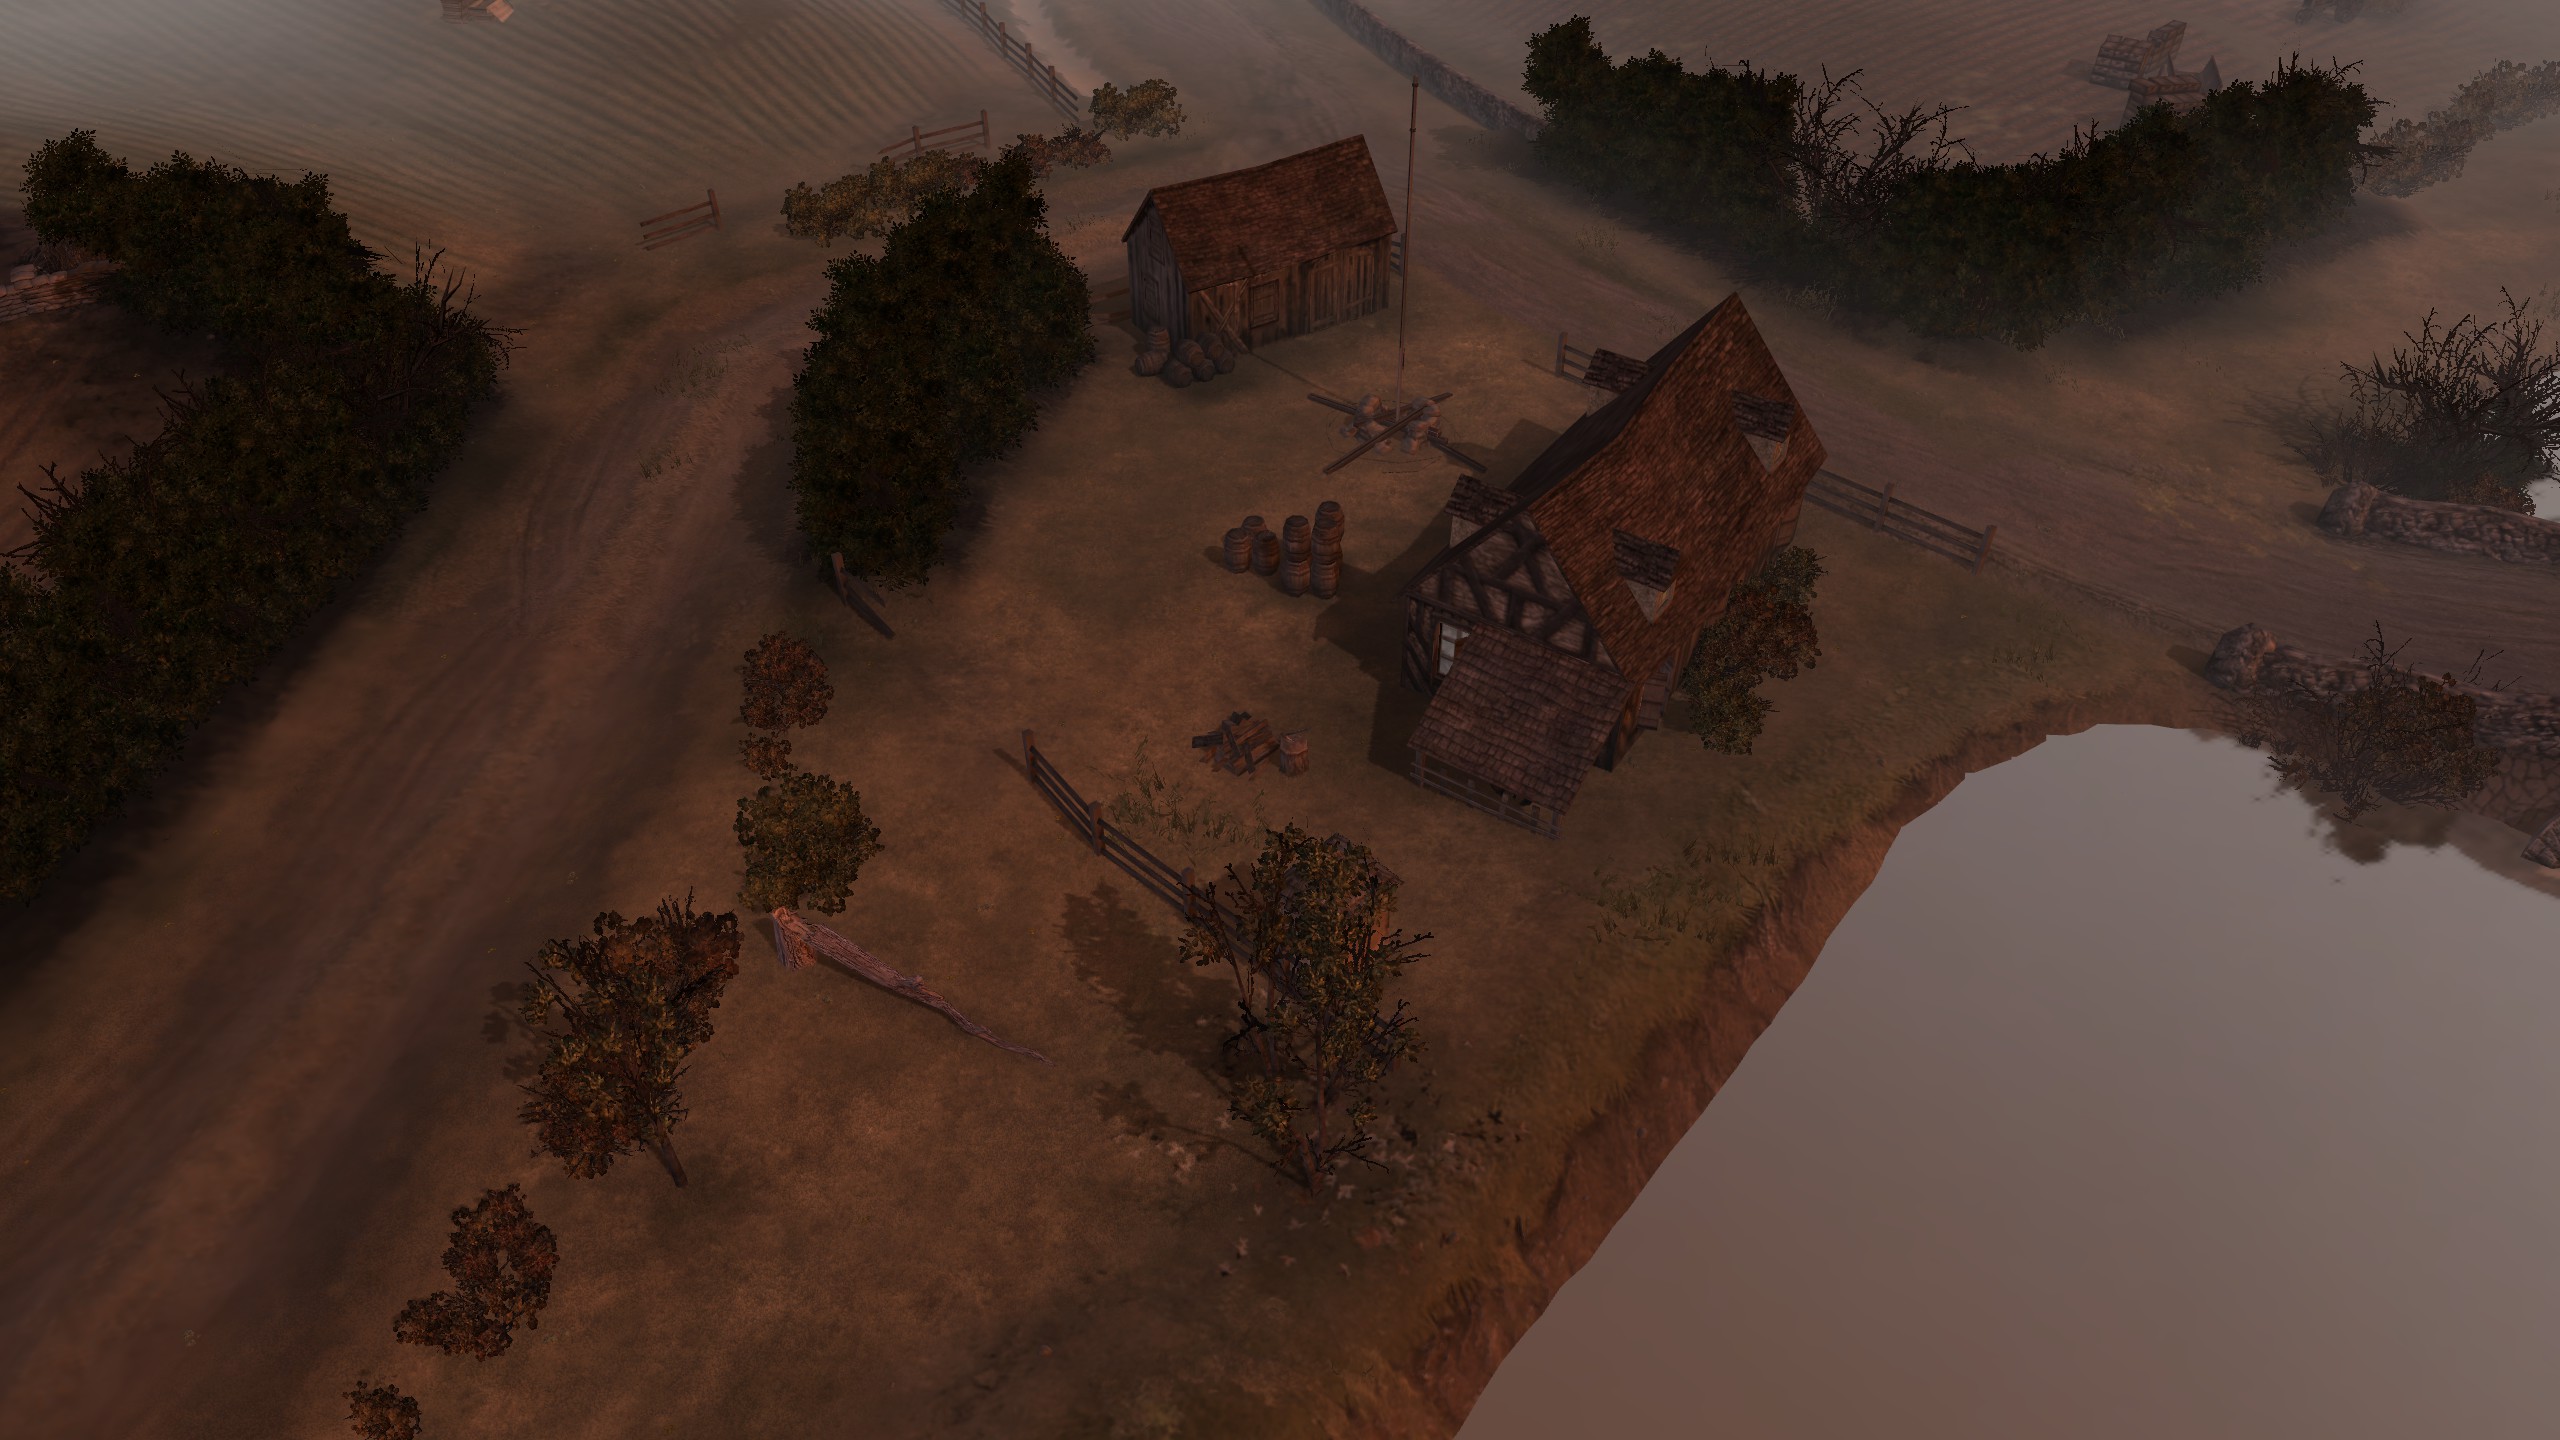 I wanted to maintain the overall feeling of the original, including small collections of houses at key locations.